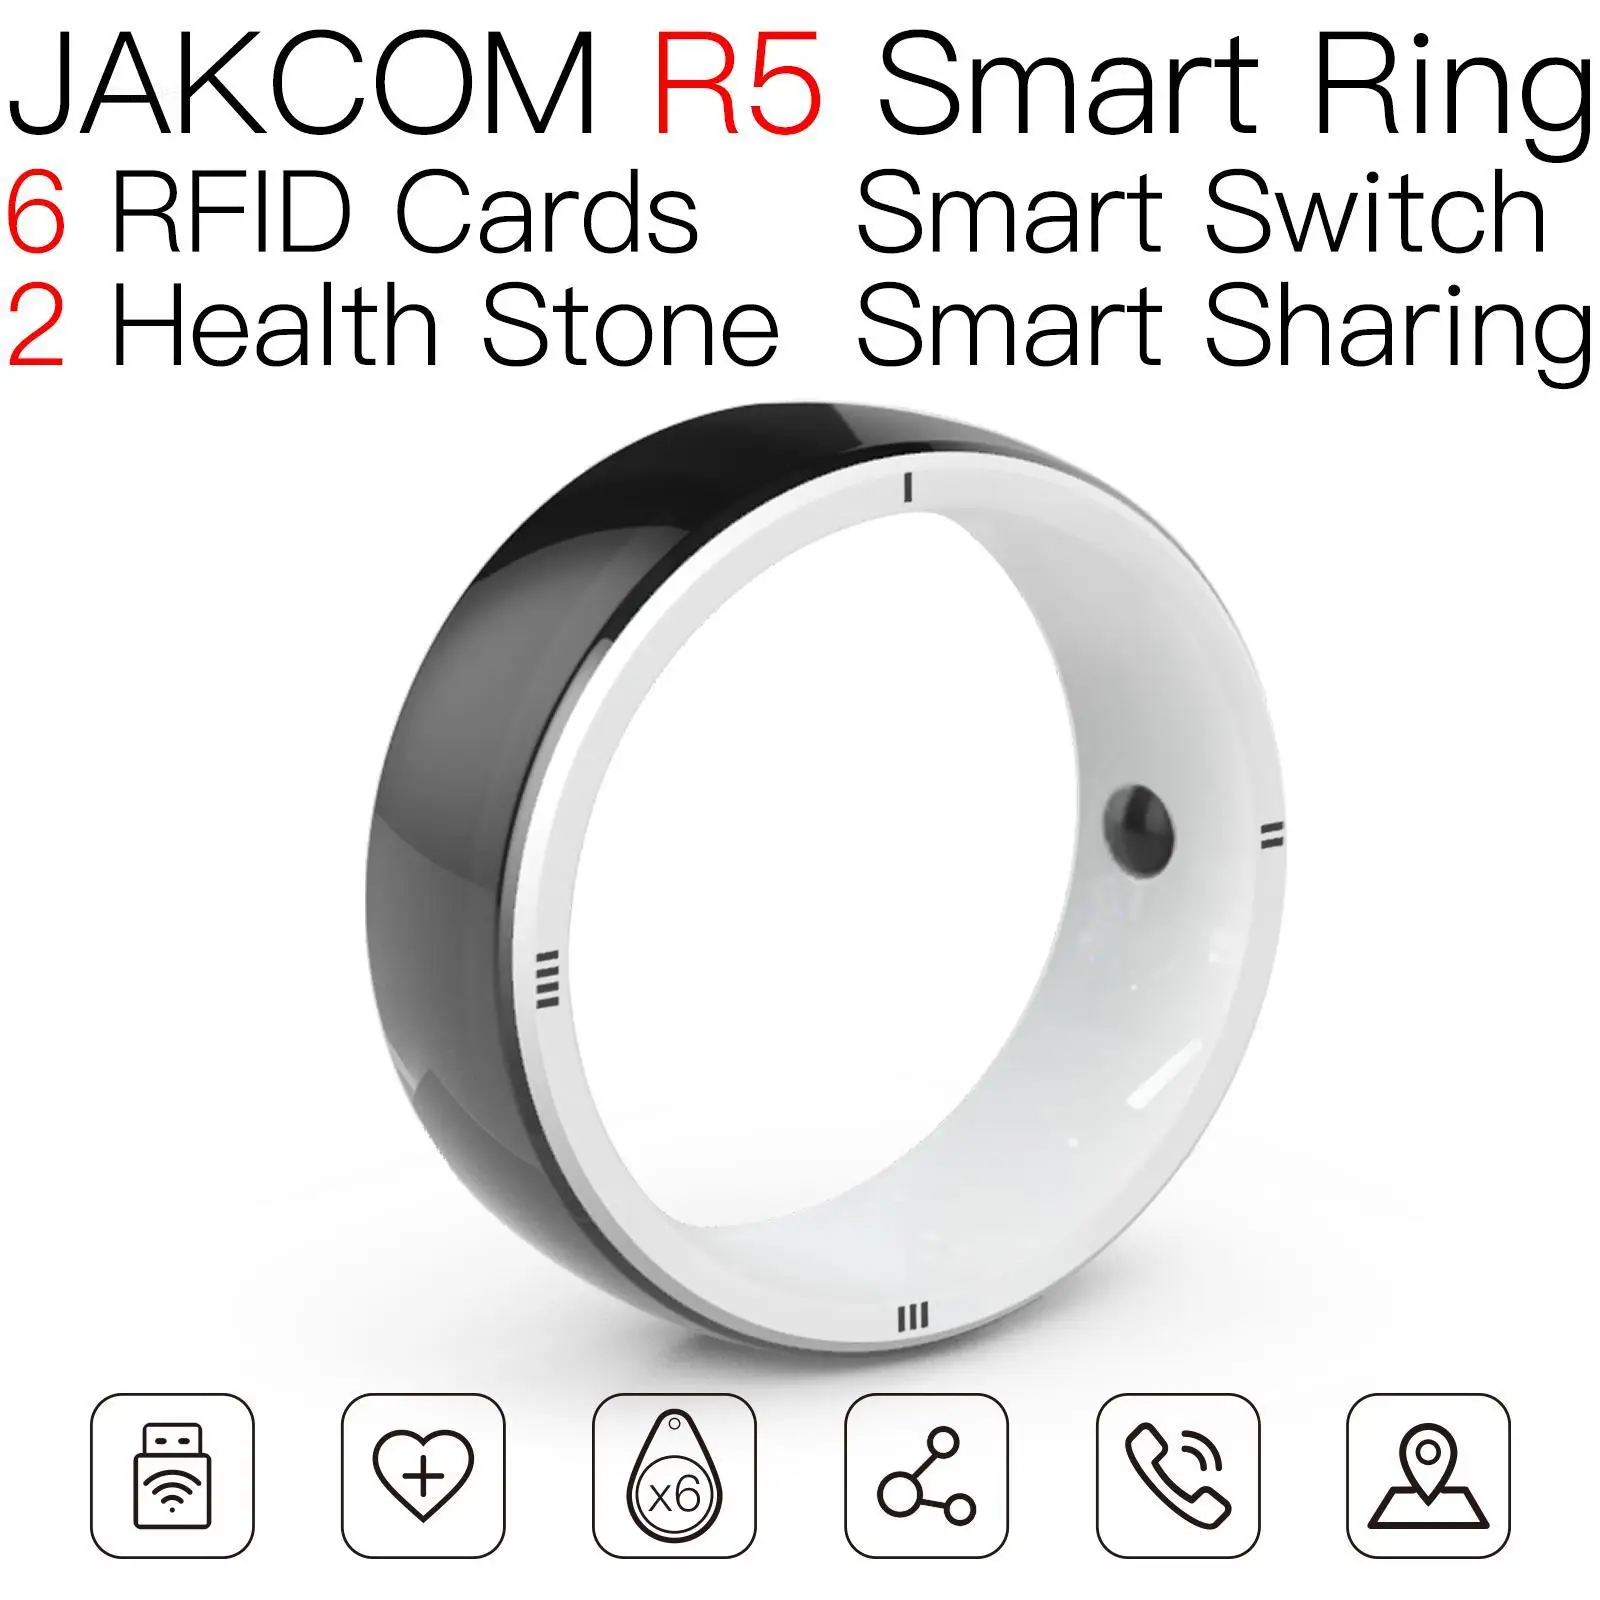 

JAKCOM R5 Smart Ring Best gift with iso 18000 6c injector rfid access control uhf laundry tag circle waterproof nfc silicone